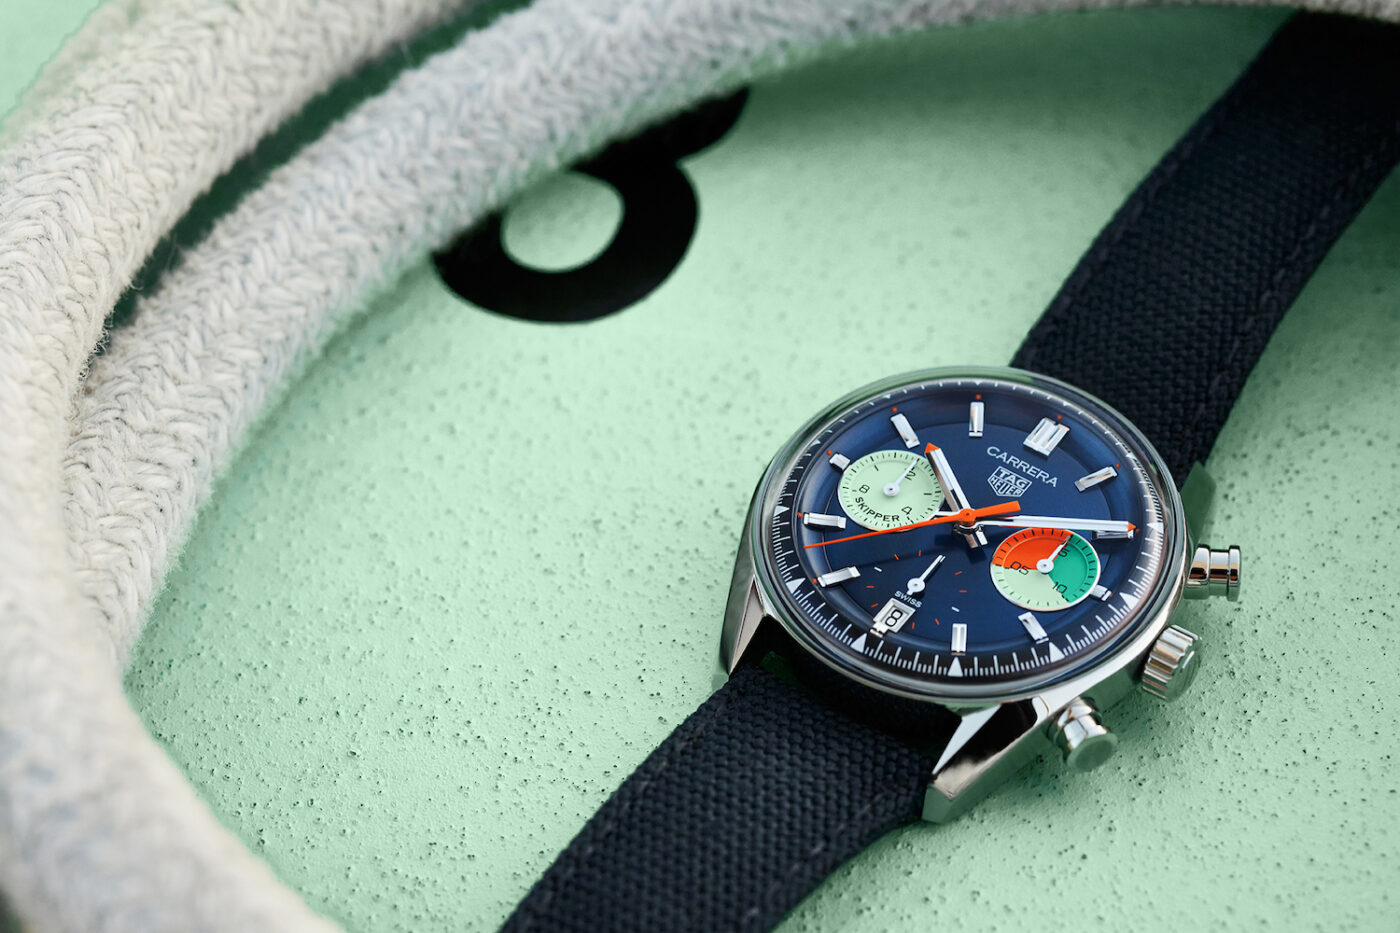 TAG Heuer’s New Carrera Skipper Is A Colourful, Preppy Take On A Classic Watch